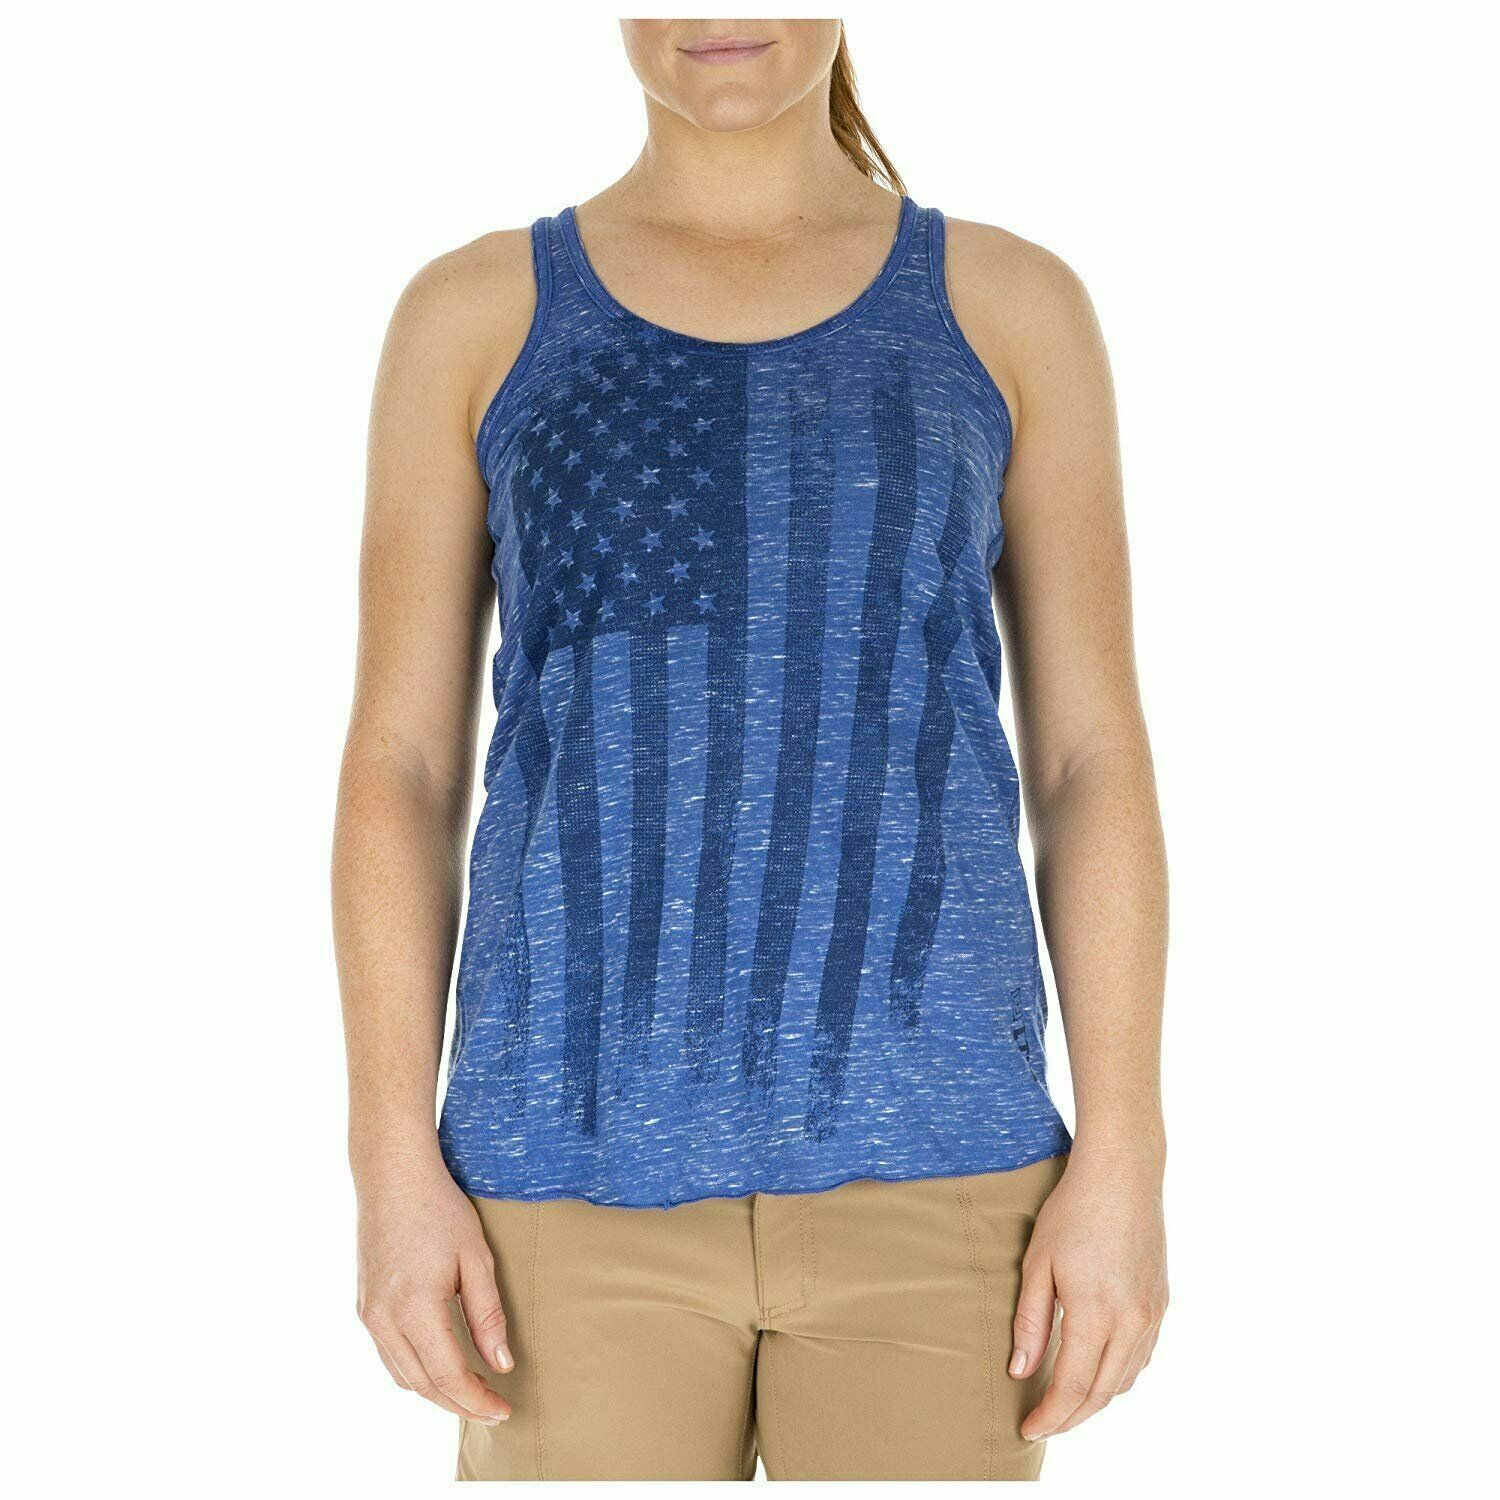 5.11 Tactical Women's Dusted Glory Tank Top, Poly/cotton, Style 31015aa